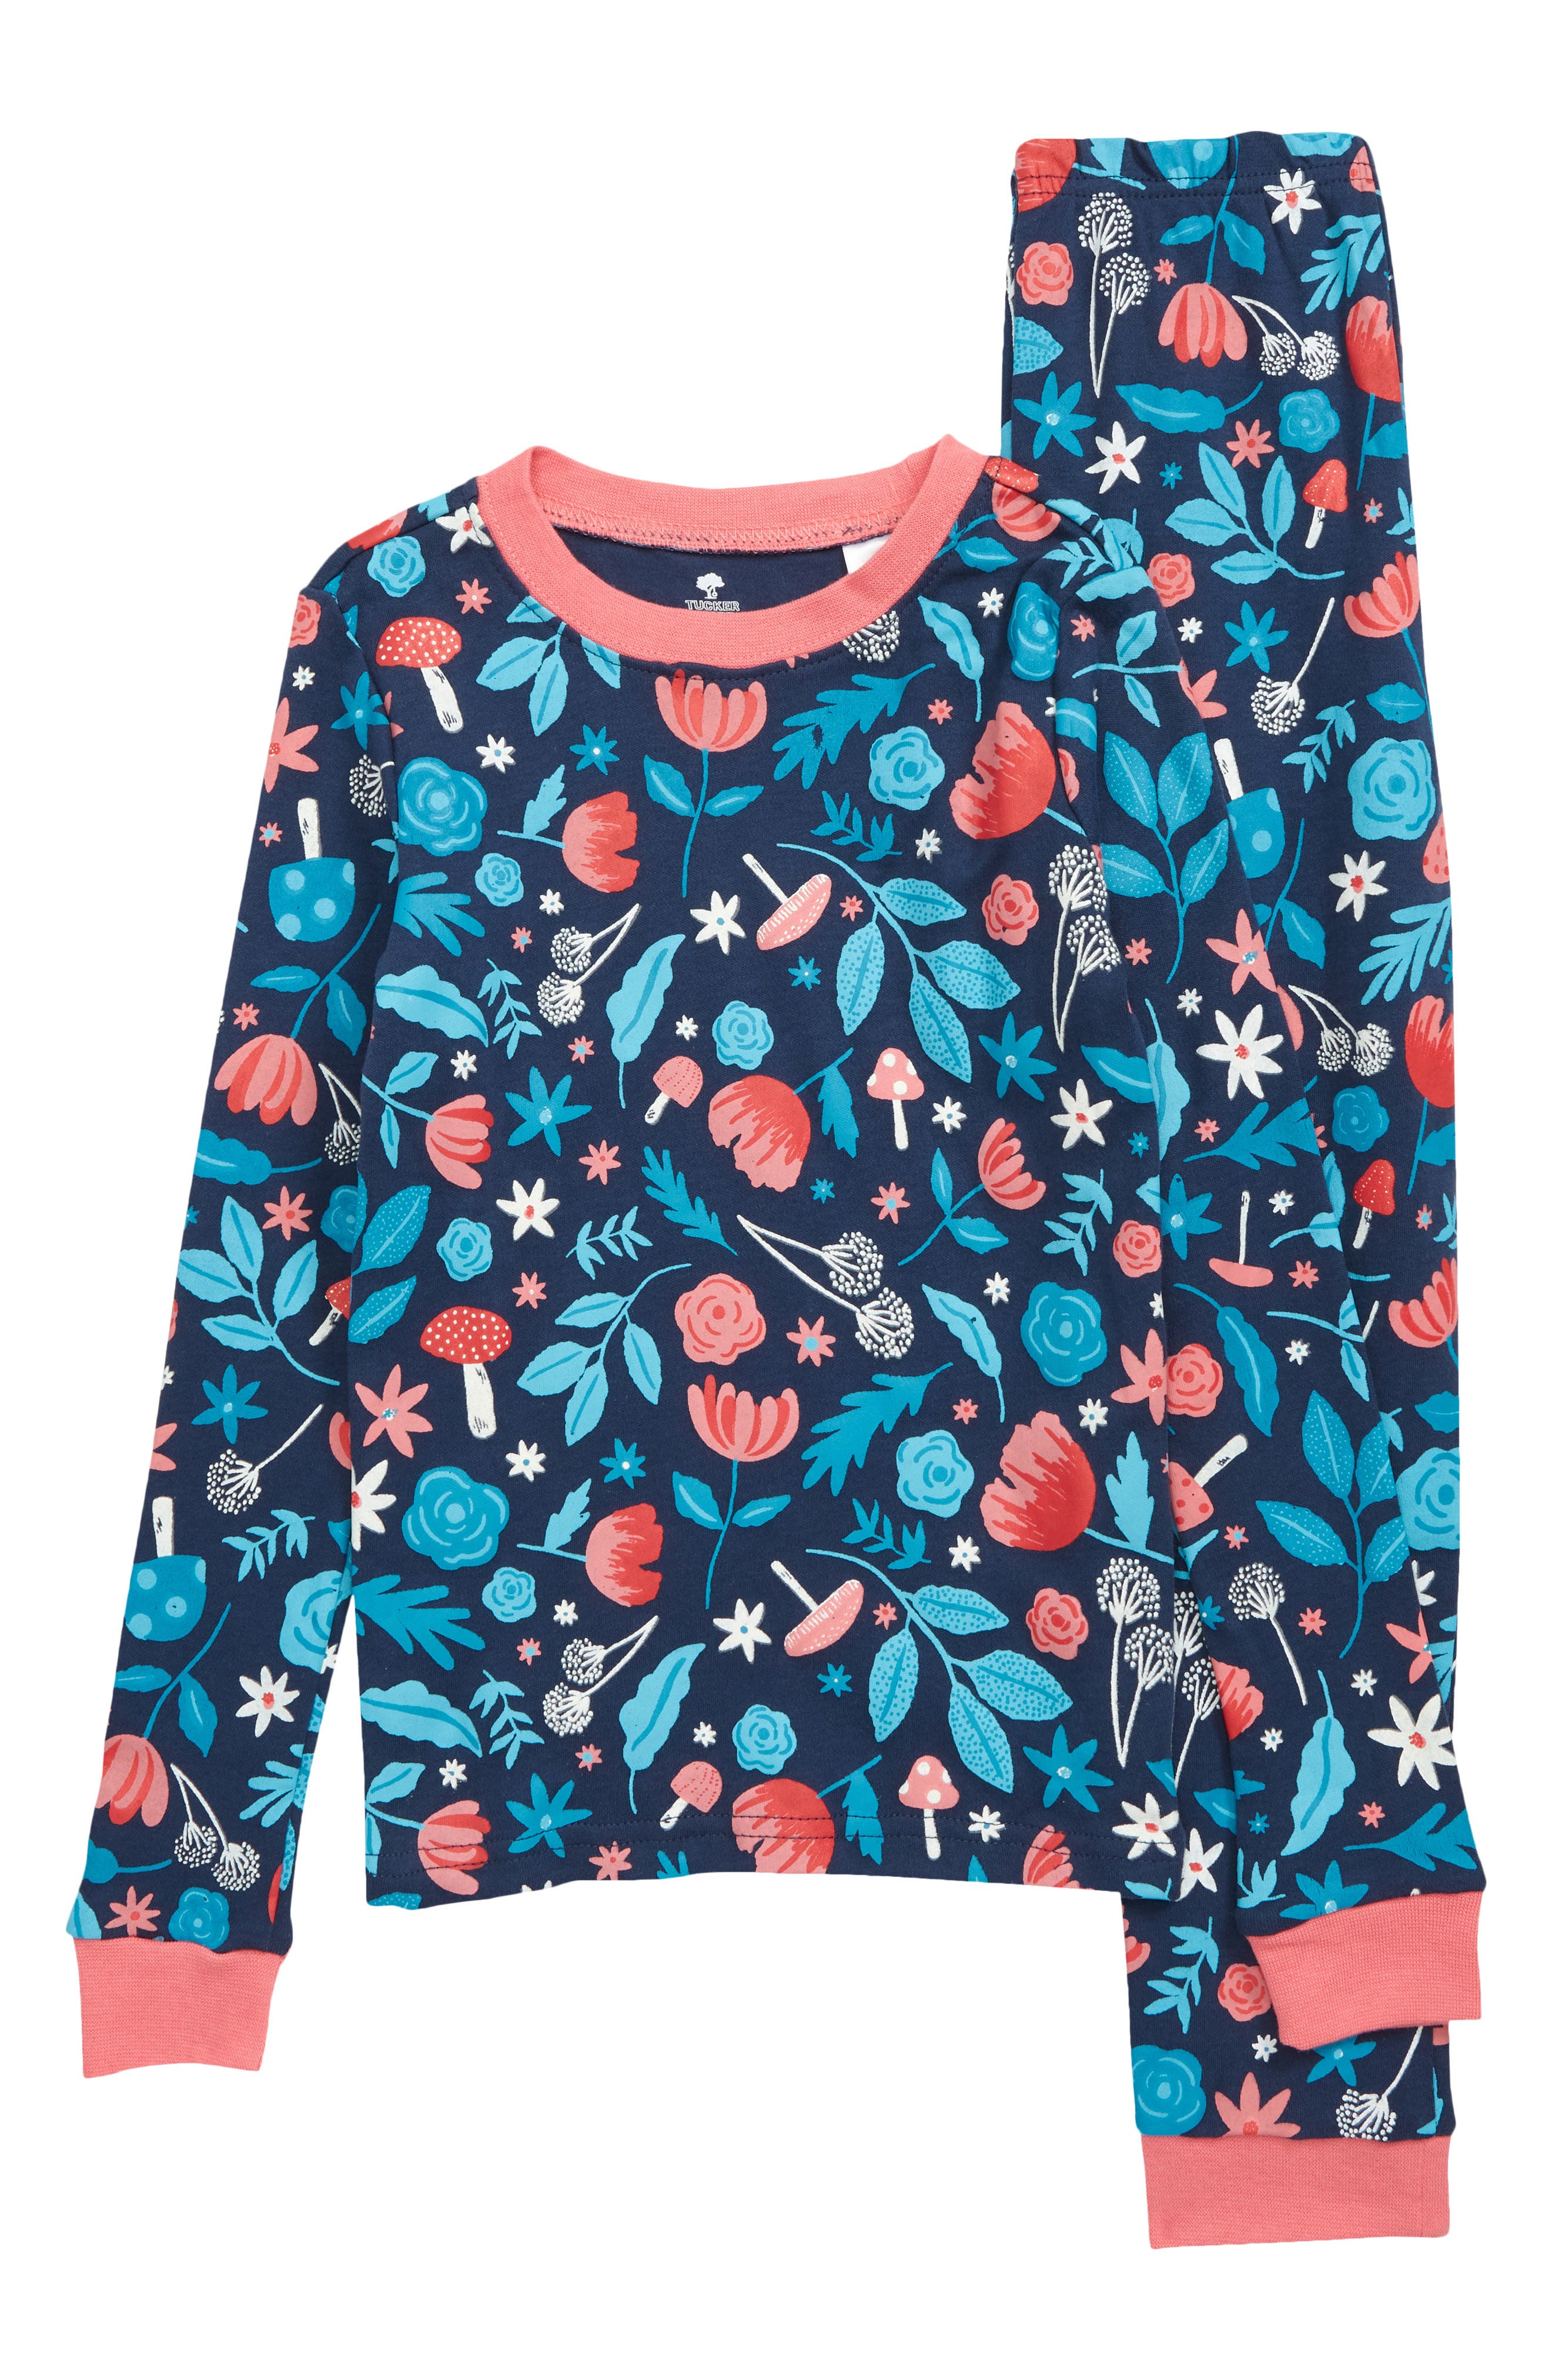 Tucker + Tate Kids' Glow in the Dark Fitted Two-Piece Pajamas in Navy Denim Fungi Floral Glow